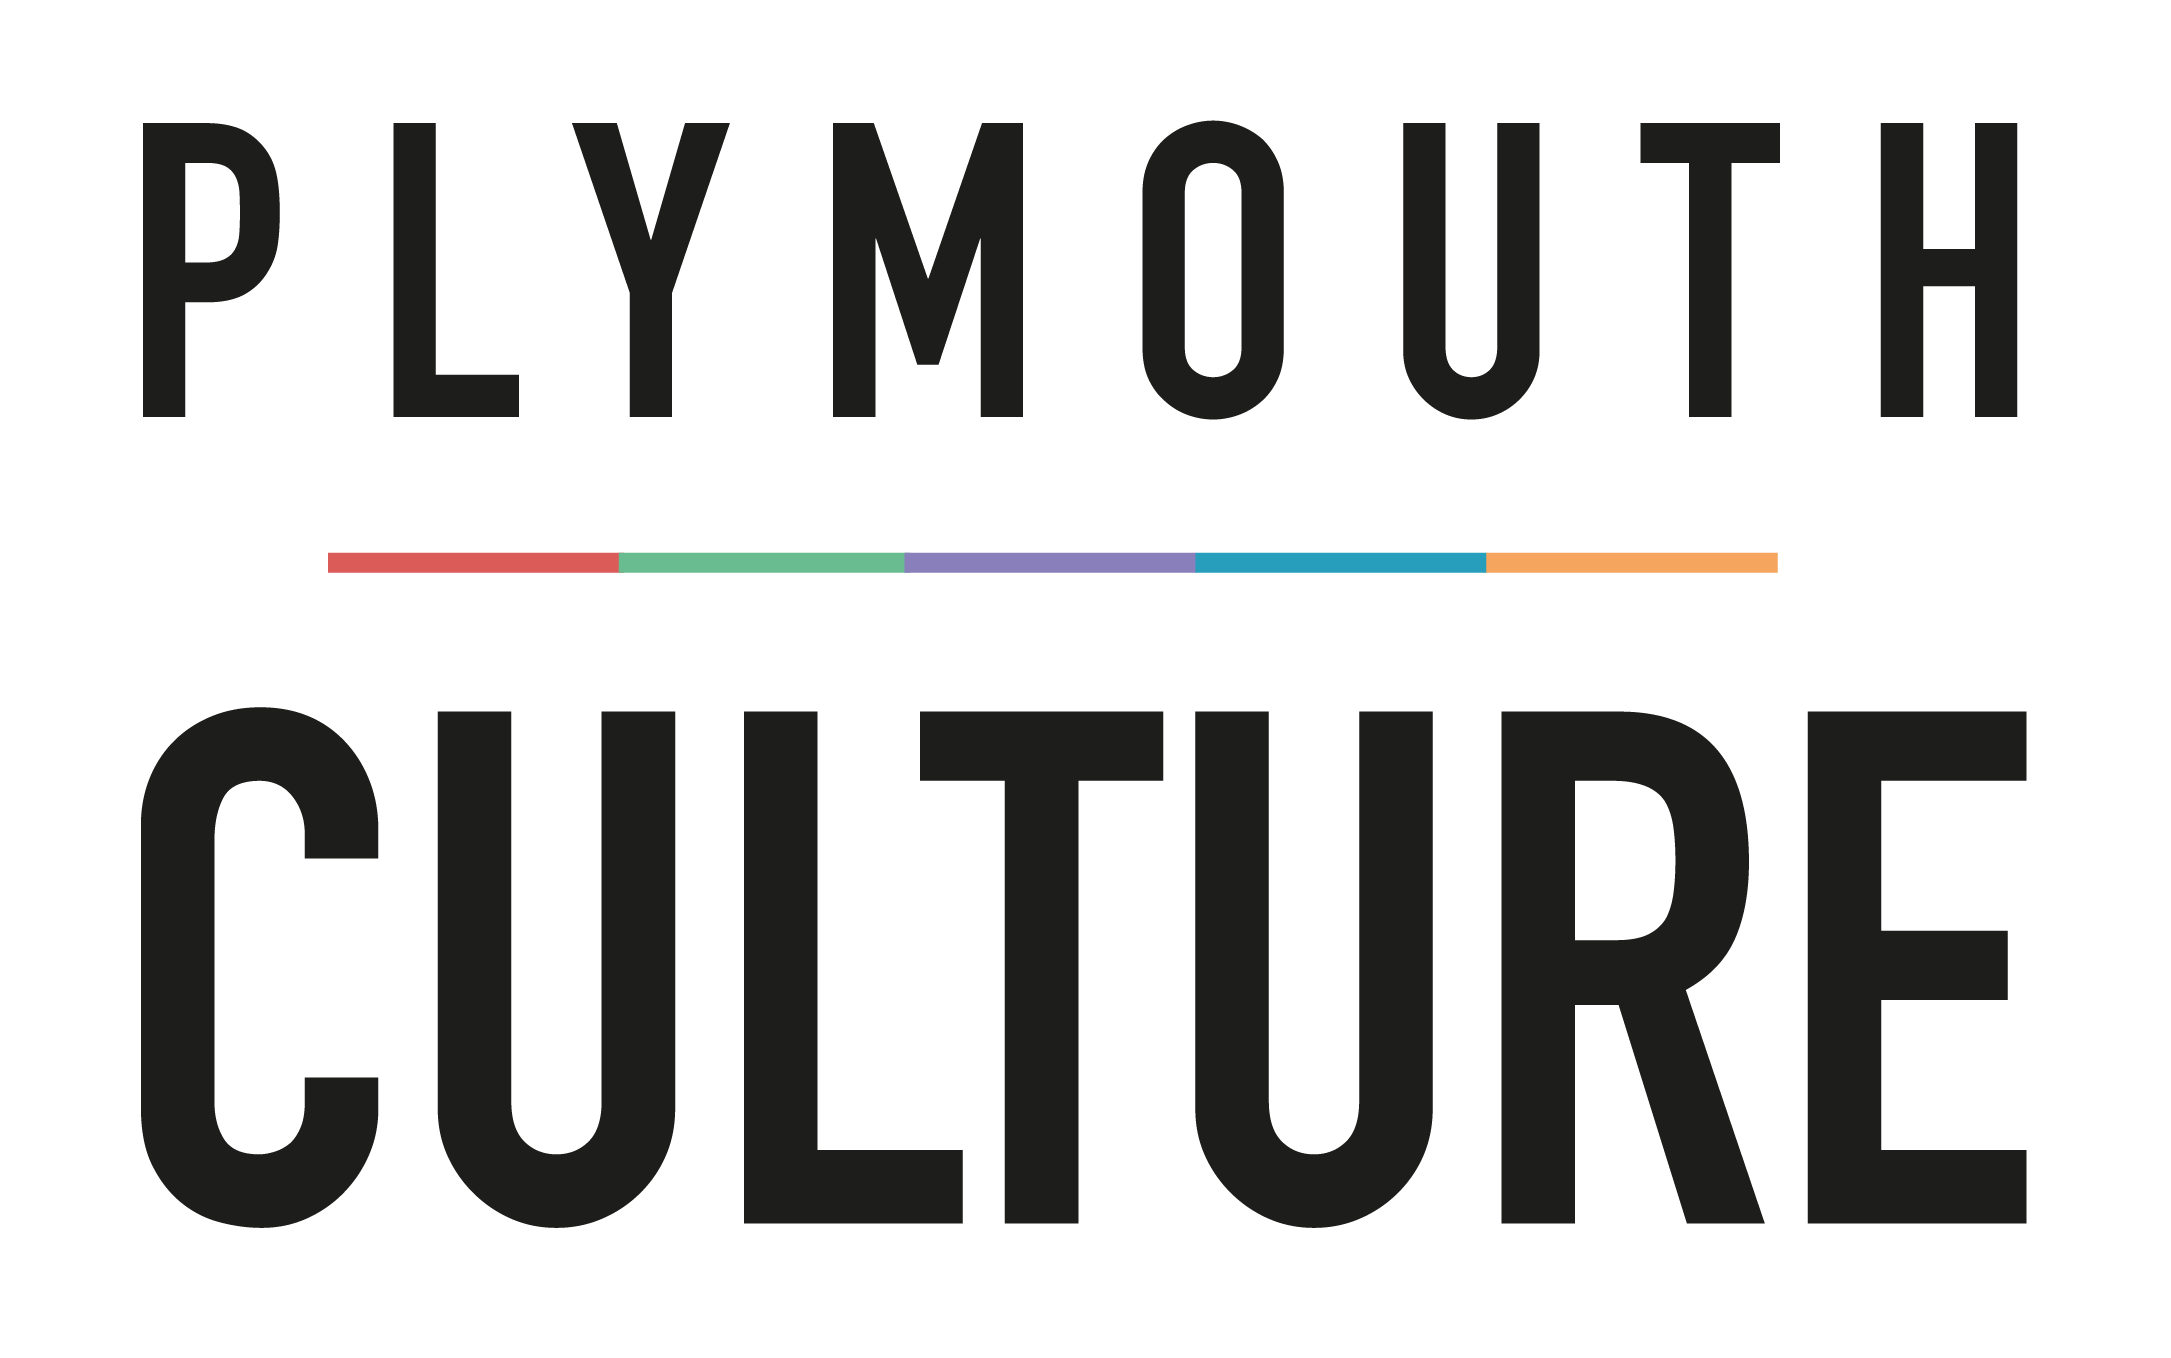 PLYMOUTH CULTURE